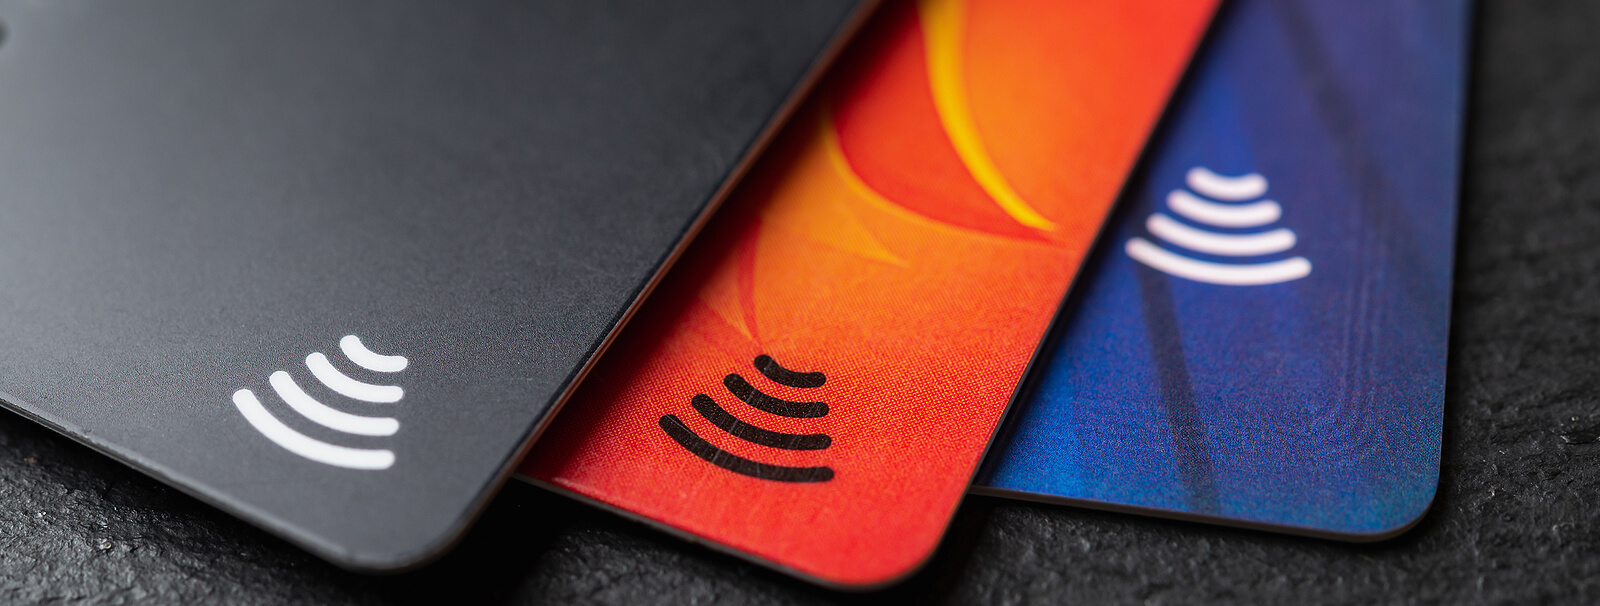 3 credit cards flat showing contactless payment symbol